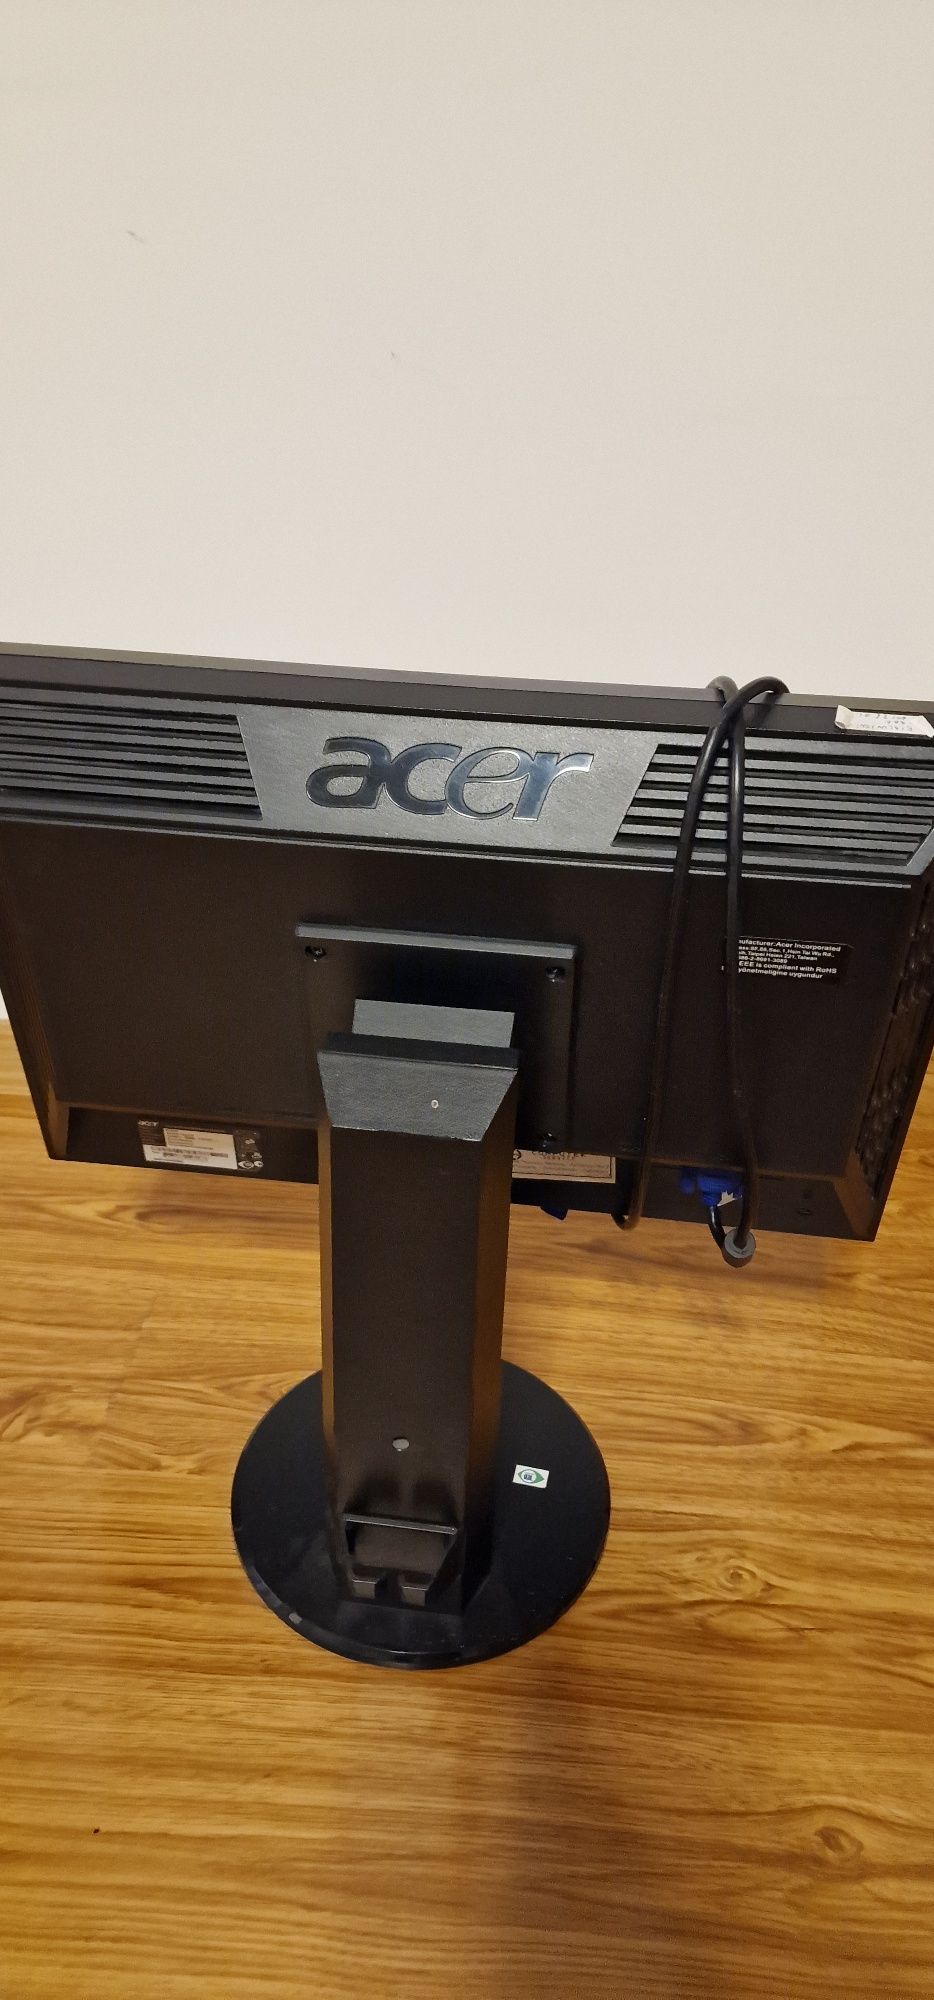 Monitor acer 300 ron